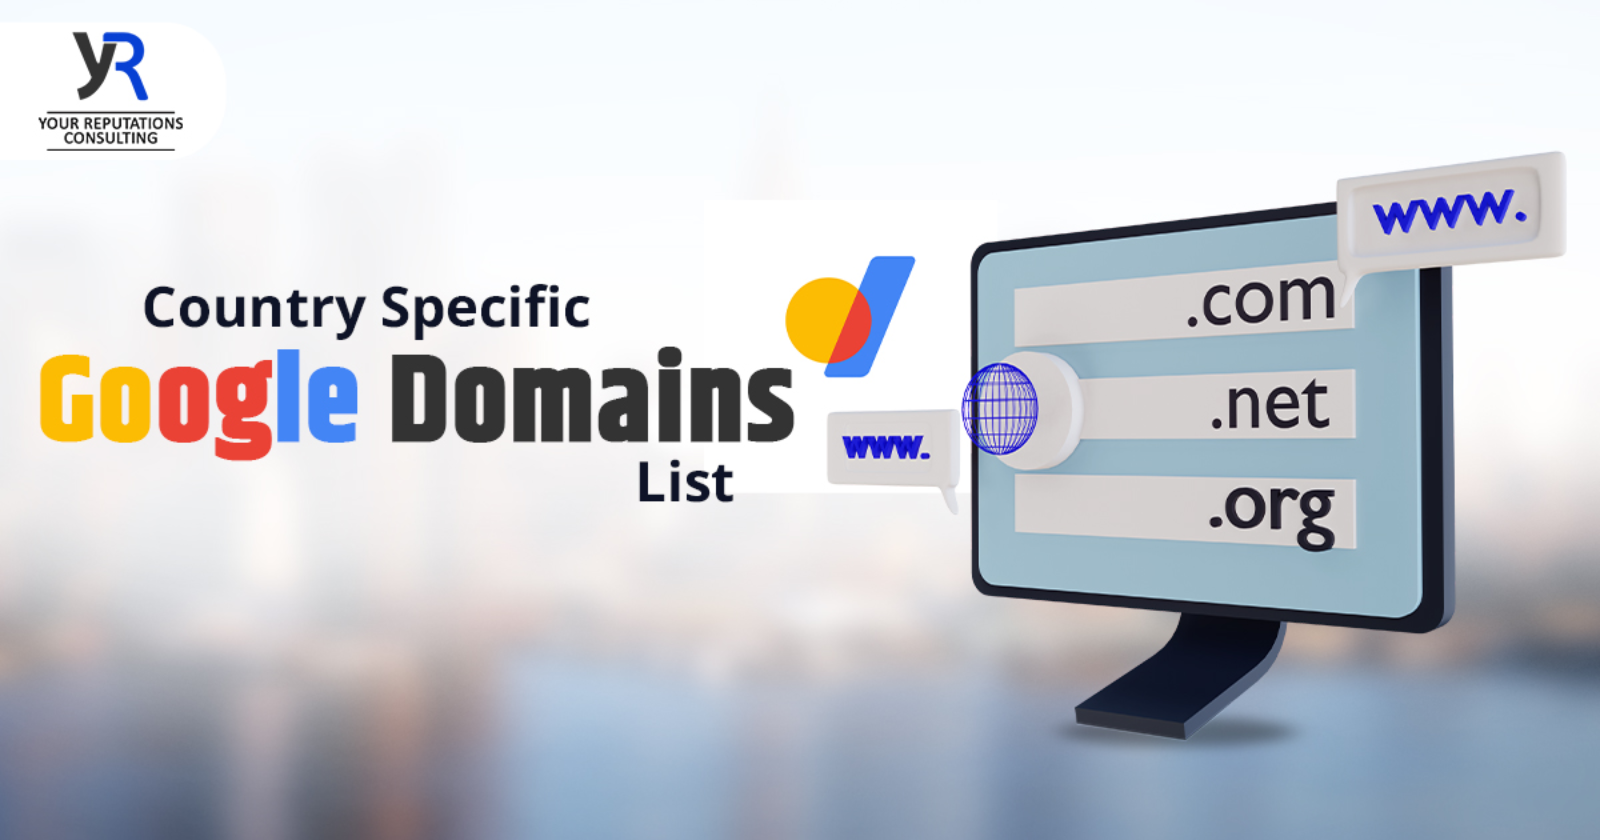 Country specific Google domains list